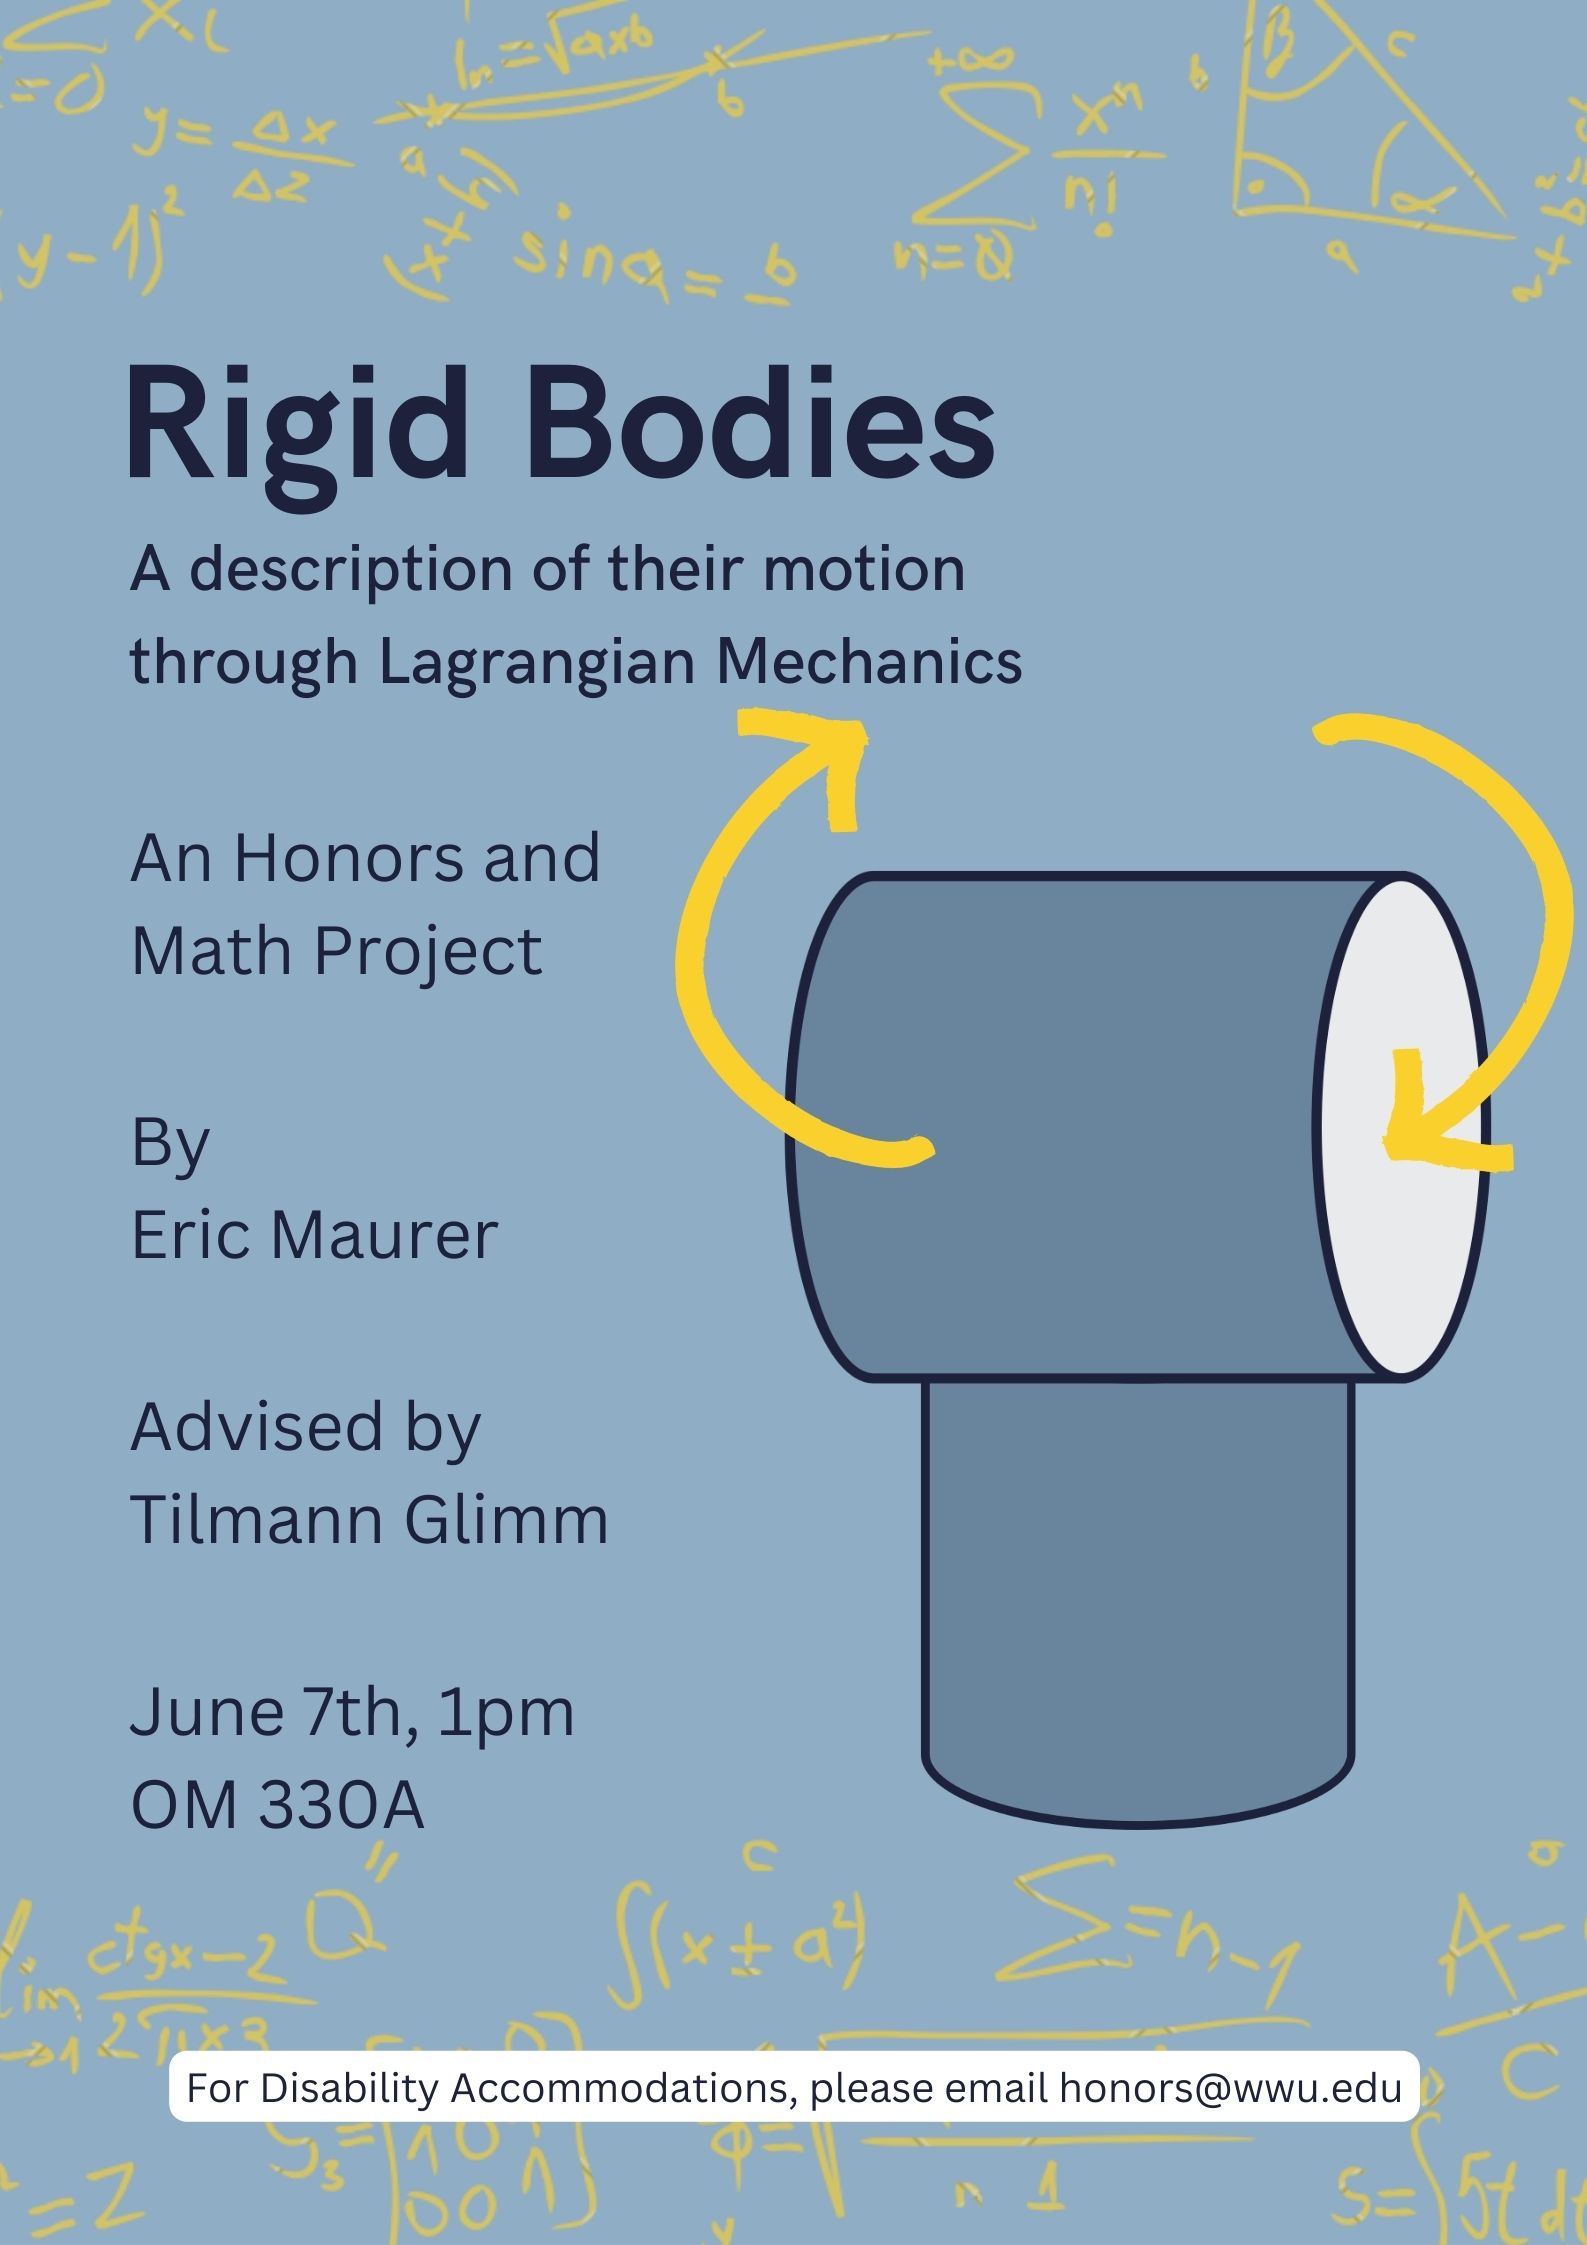 Gray background with image of t-handle and right-hand side. Curved yellow arrows imply that the t-handle is spinning about a vertical axis. Text reads: "Rigid Bodies, A description of their motion through Lagrangian Mechanism. An Honors and Math Project by Eric Maurer, Advised by Tilmann Glimm. June 10th, 1pm OM330A. For Disability Accommodations, please email honors@wwu.edu."